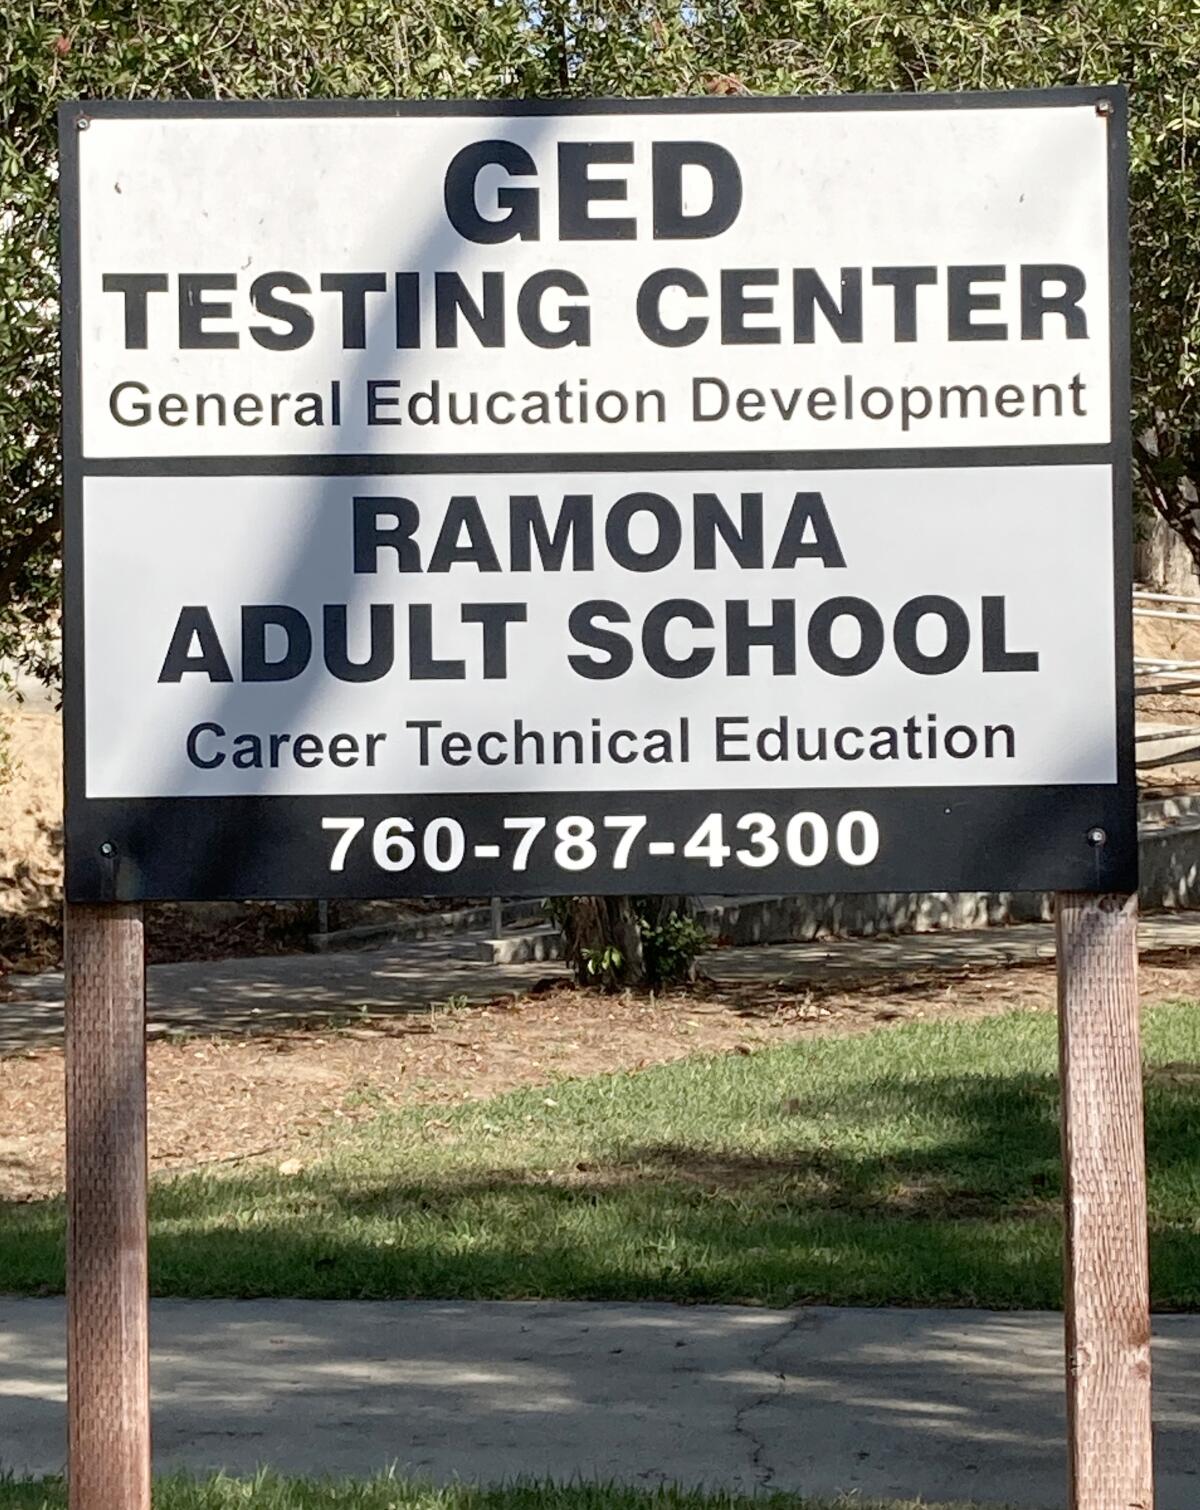 Ramona Adult School is offering free classes in citizenship and ESL starting this week.